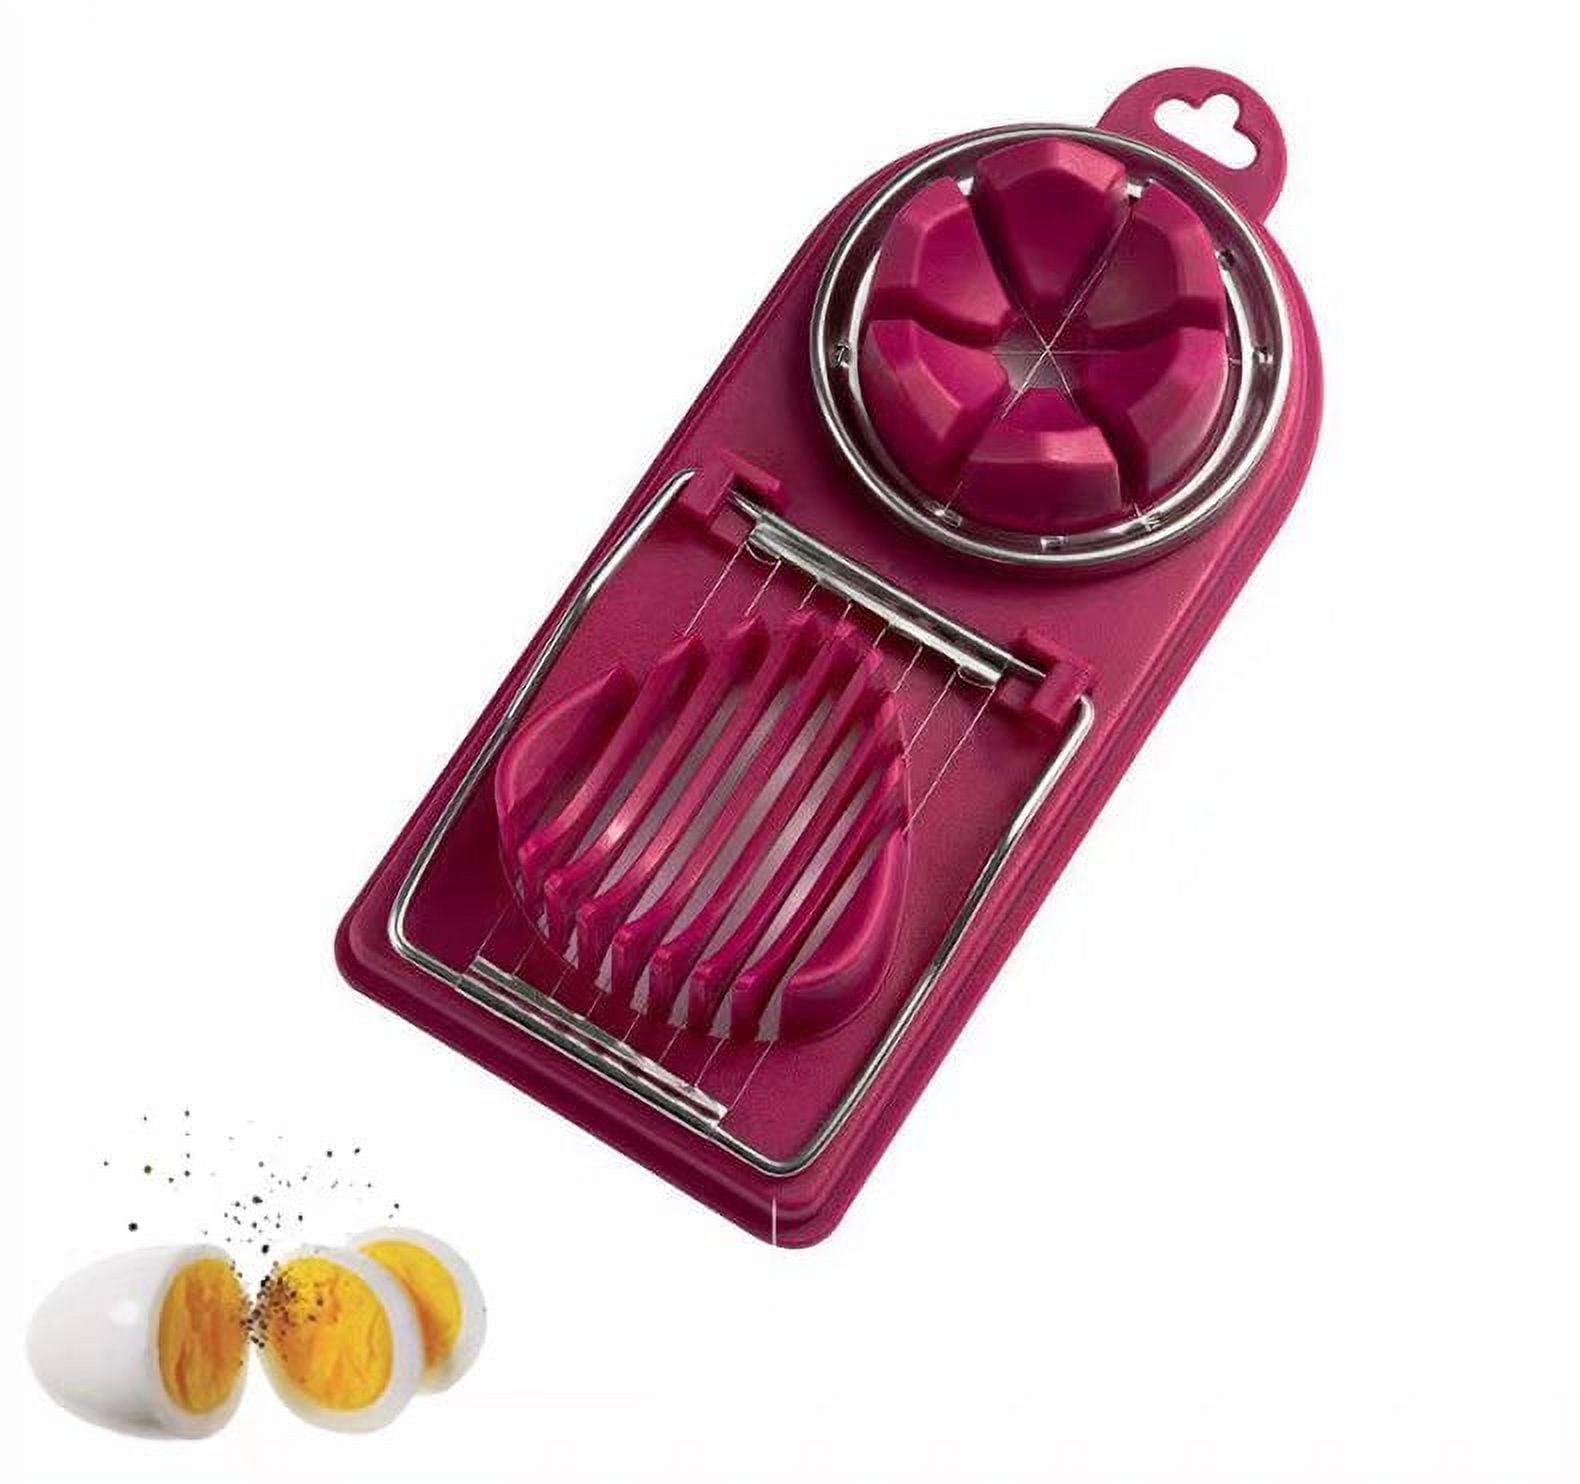 Ezonedeal Egg Slicer with Stainless Steel Wires Perfect Boilled Egg Also used for Strawberries Boiled Potatoes or Mozzarella Balls (Pink)